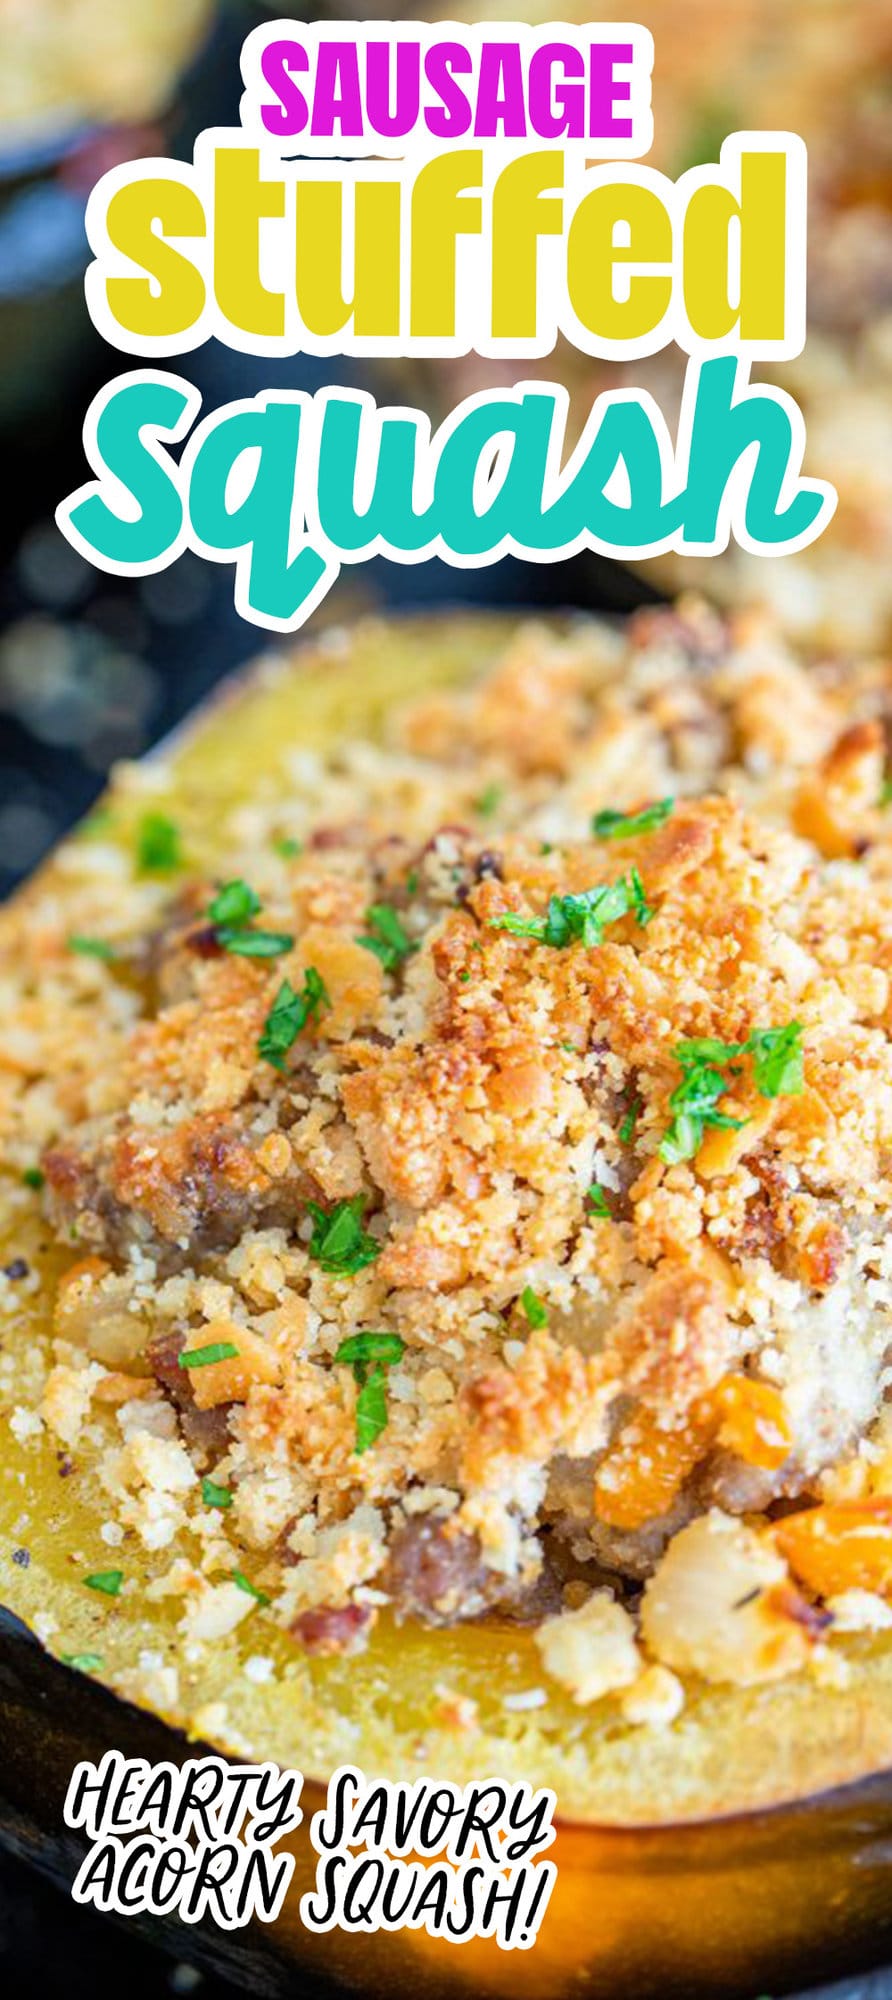 baked acorn squash stuffed with sausage and breadcrumbs
